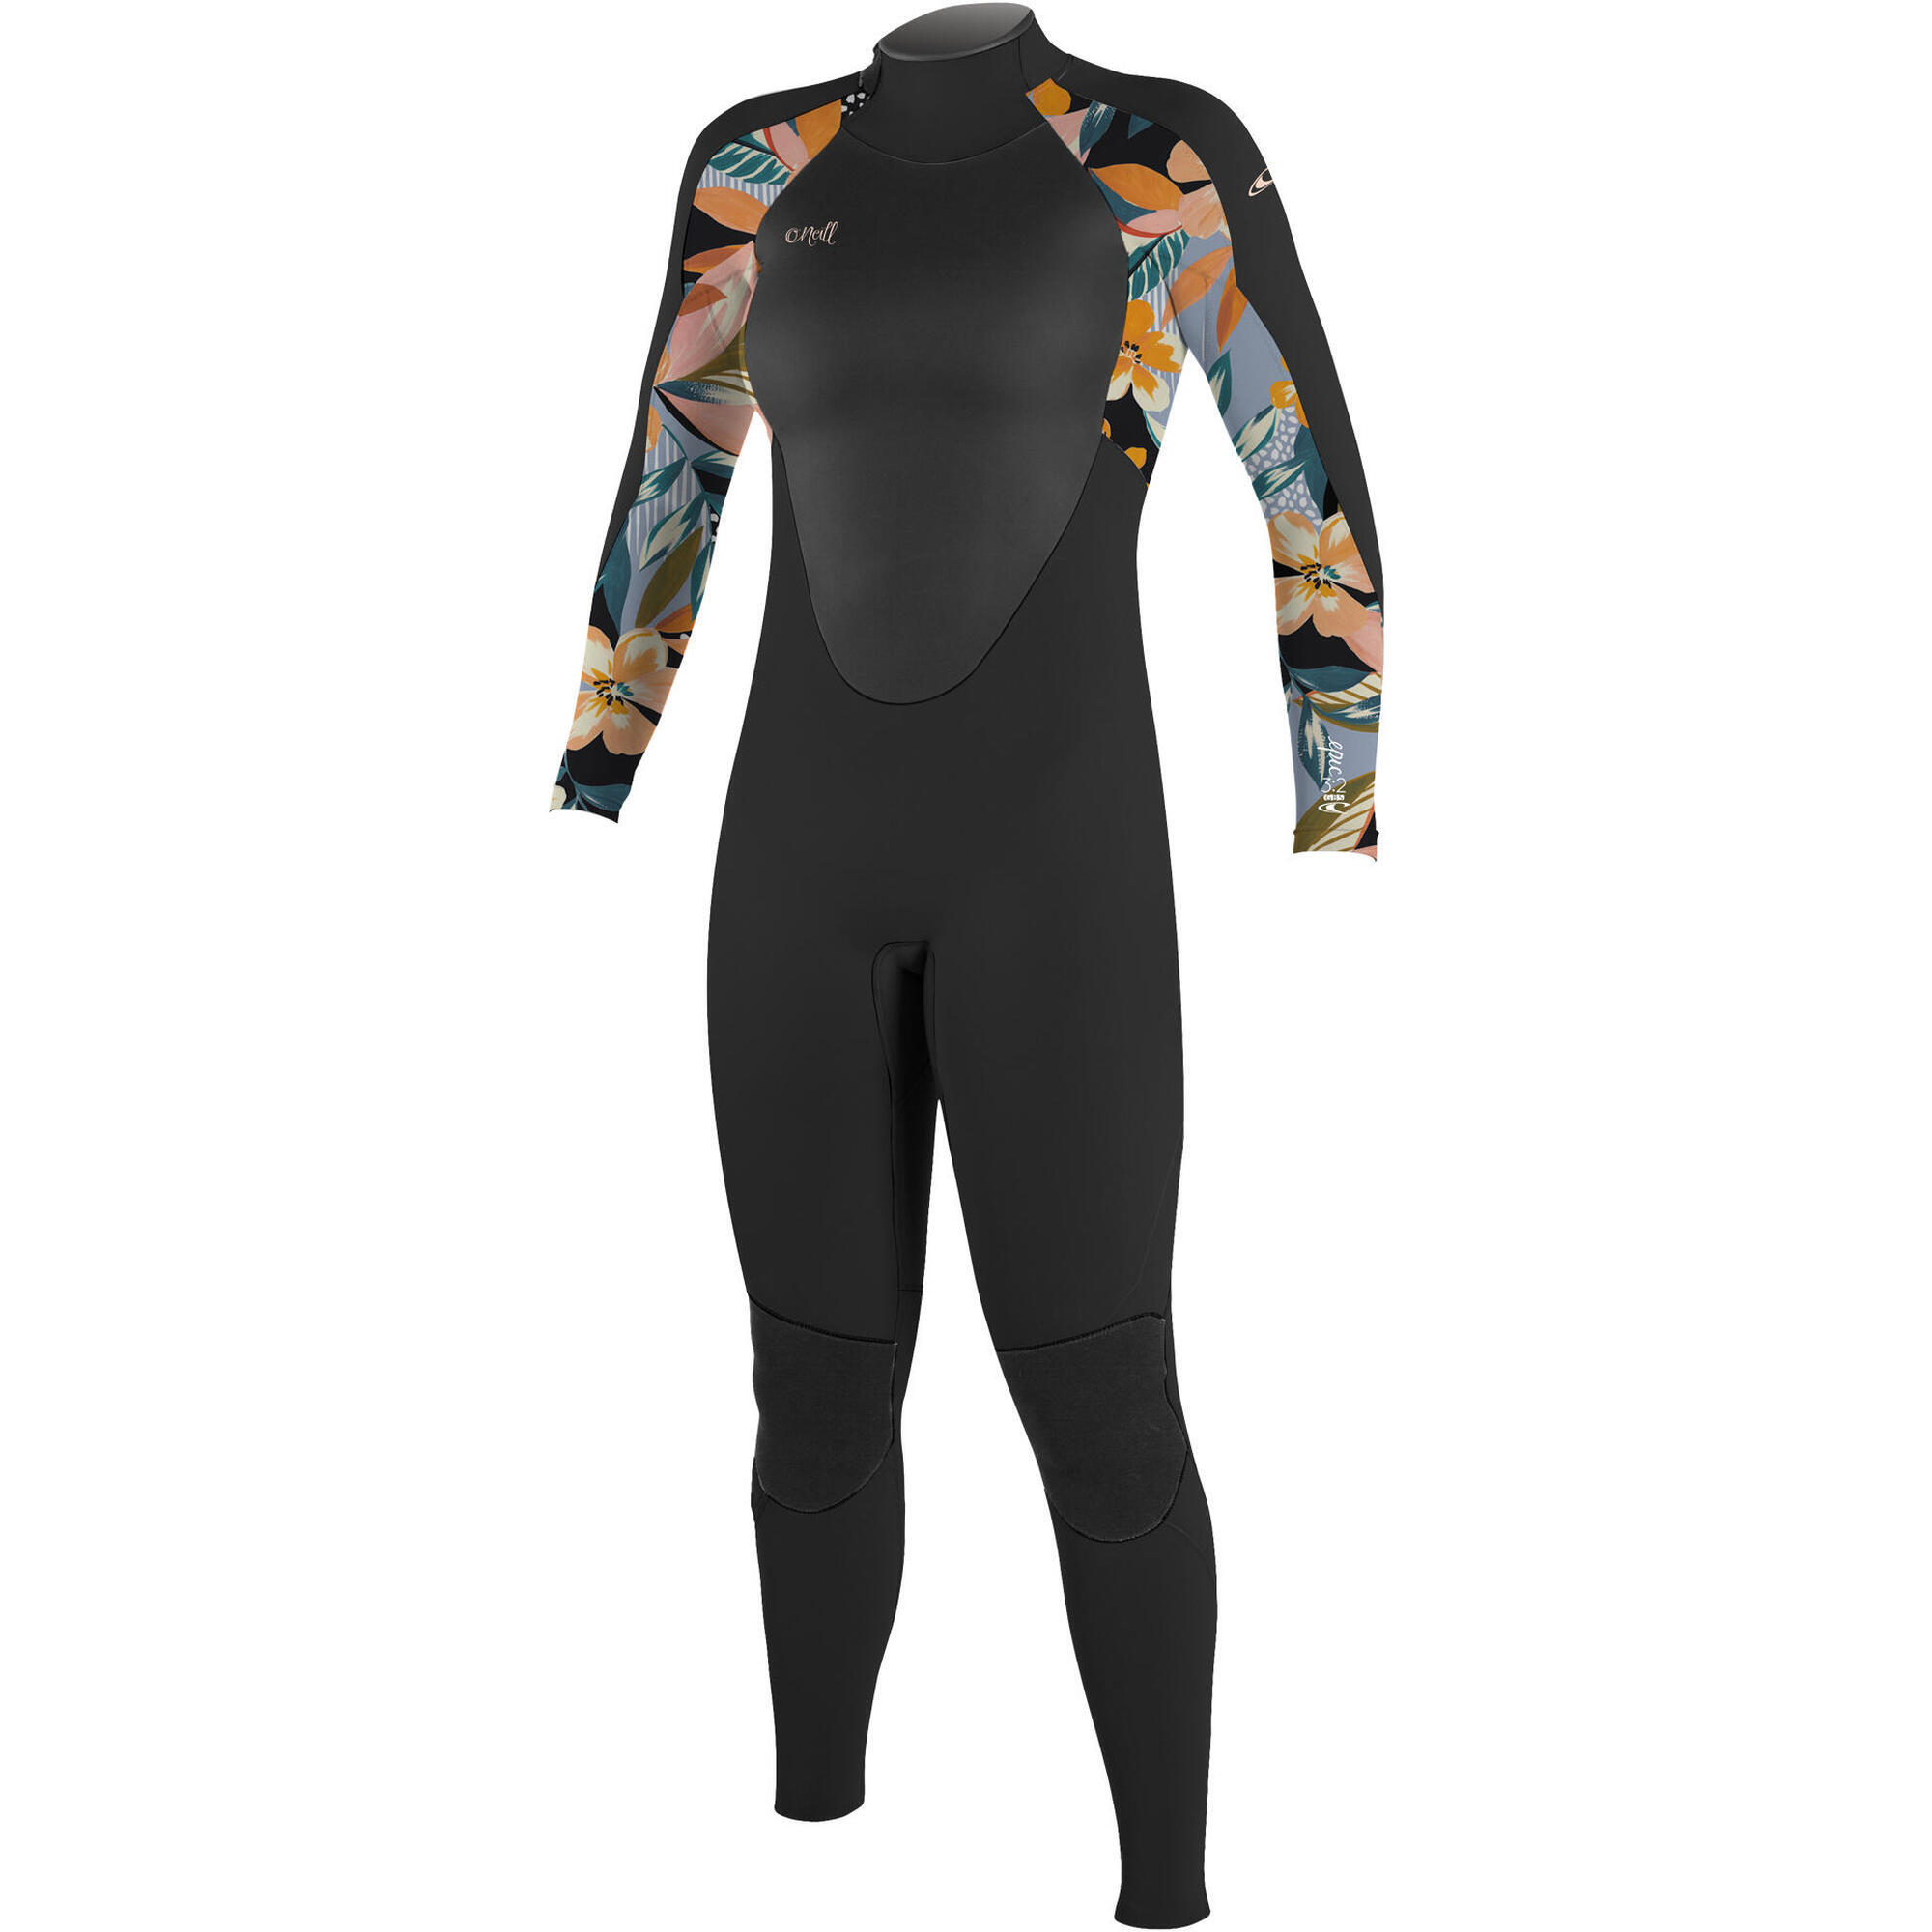 Photos - Wetsuit ONeill O'neill Epic 3/2mm Back Zip Gbs  - / Demiflor 